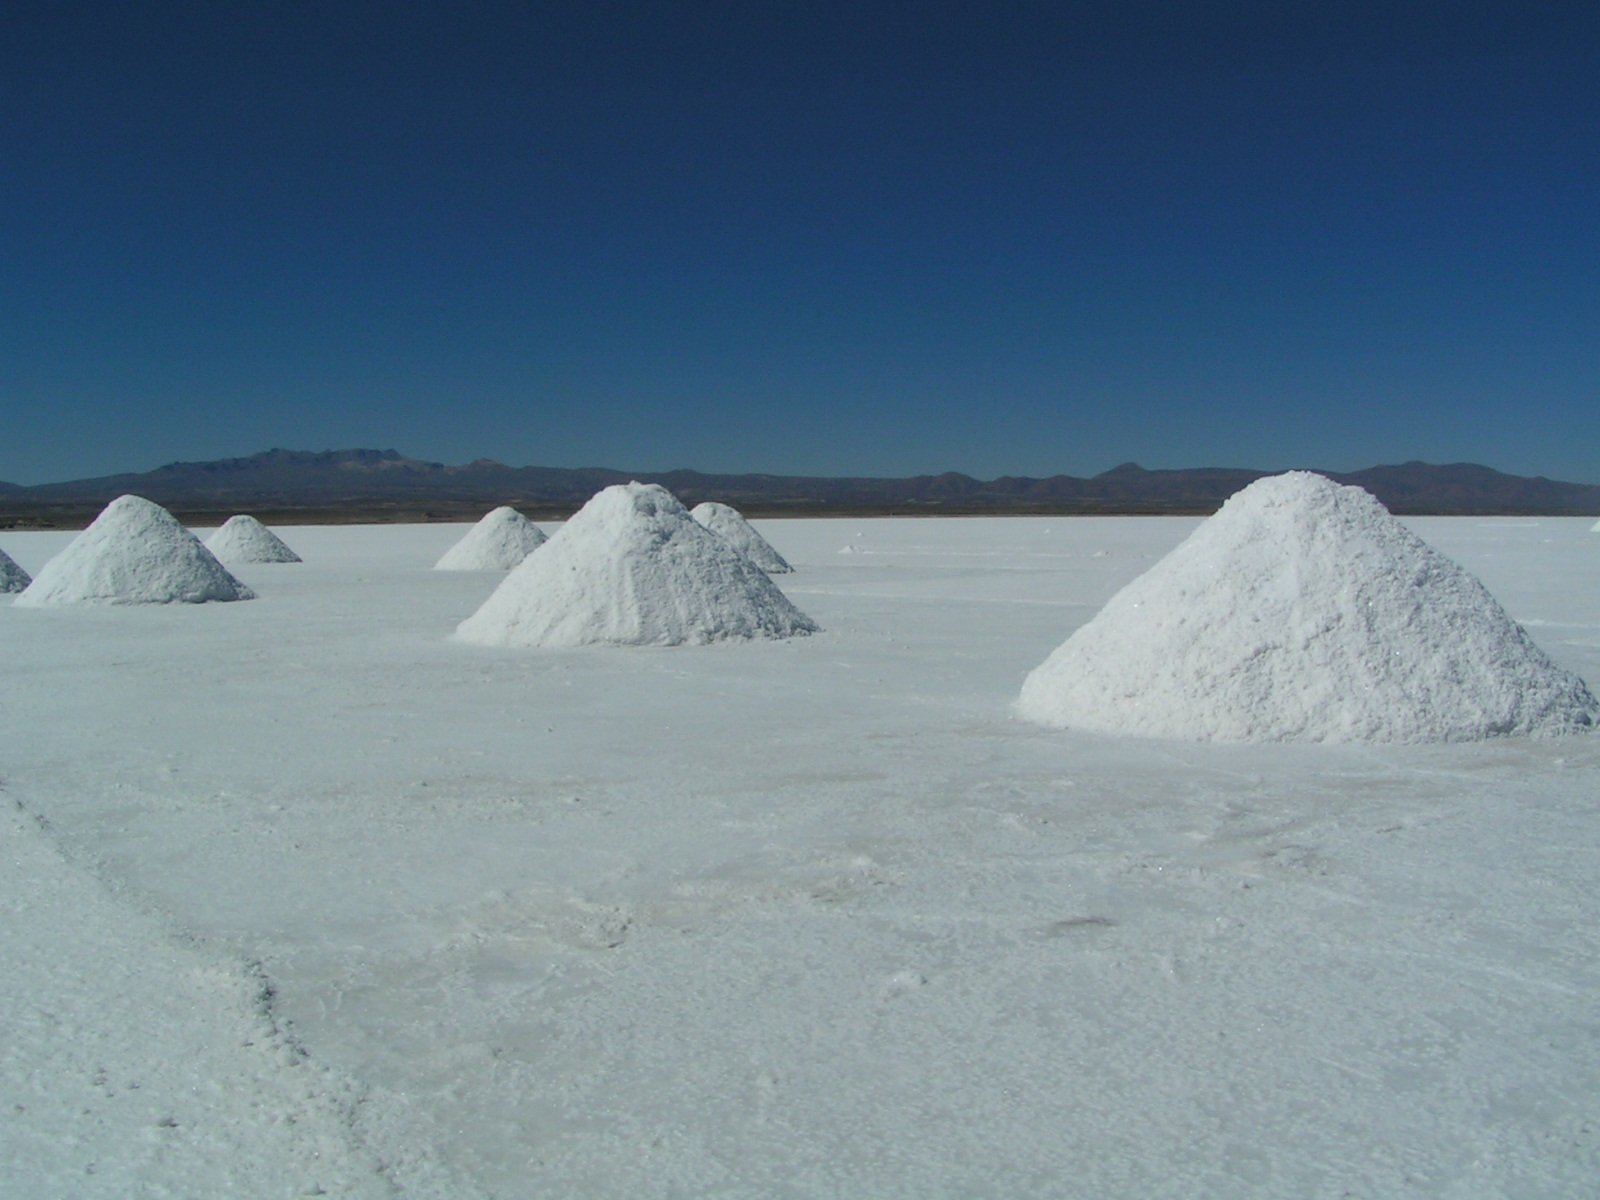 piles of white sand sit in the middle of a desert landscape